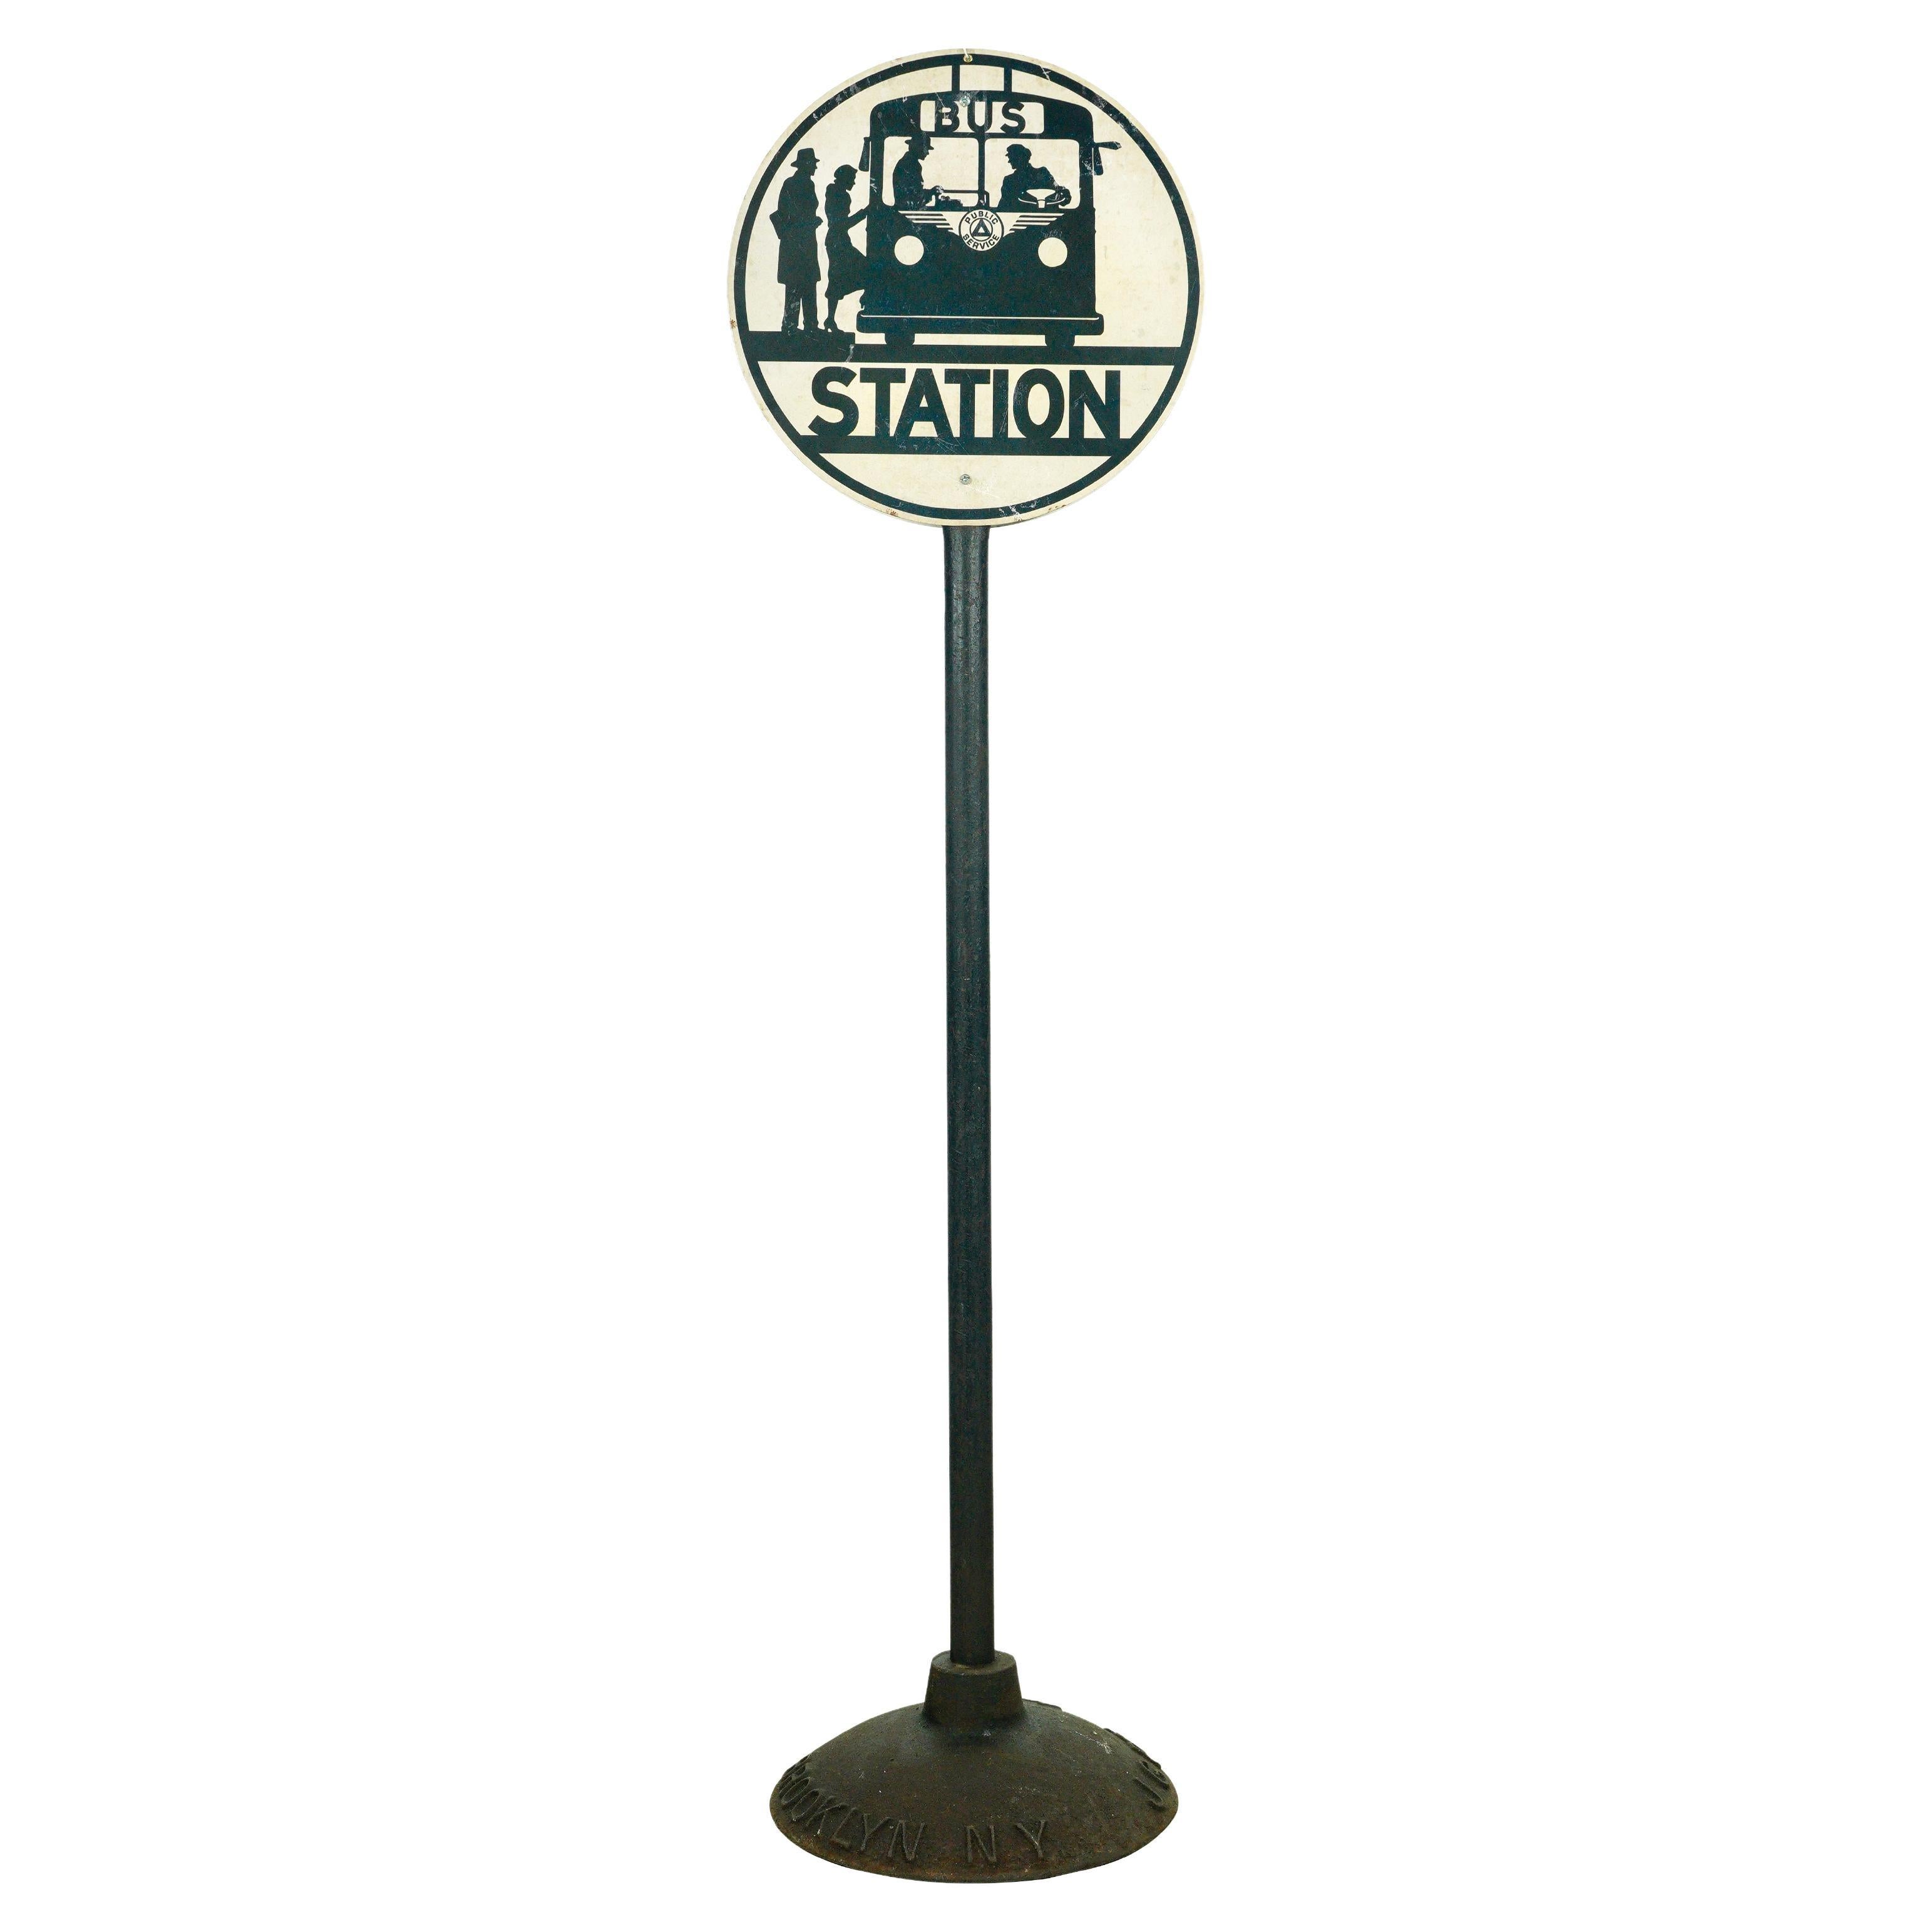 Antique Steel & Cast Iron Bus Station Standing Pole Sign by J.G. Pollard Co.  For Sale